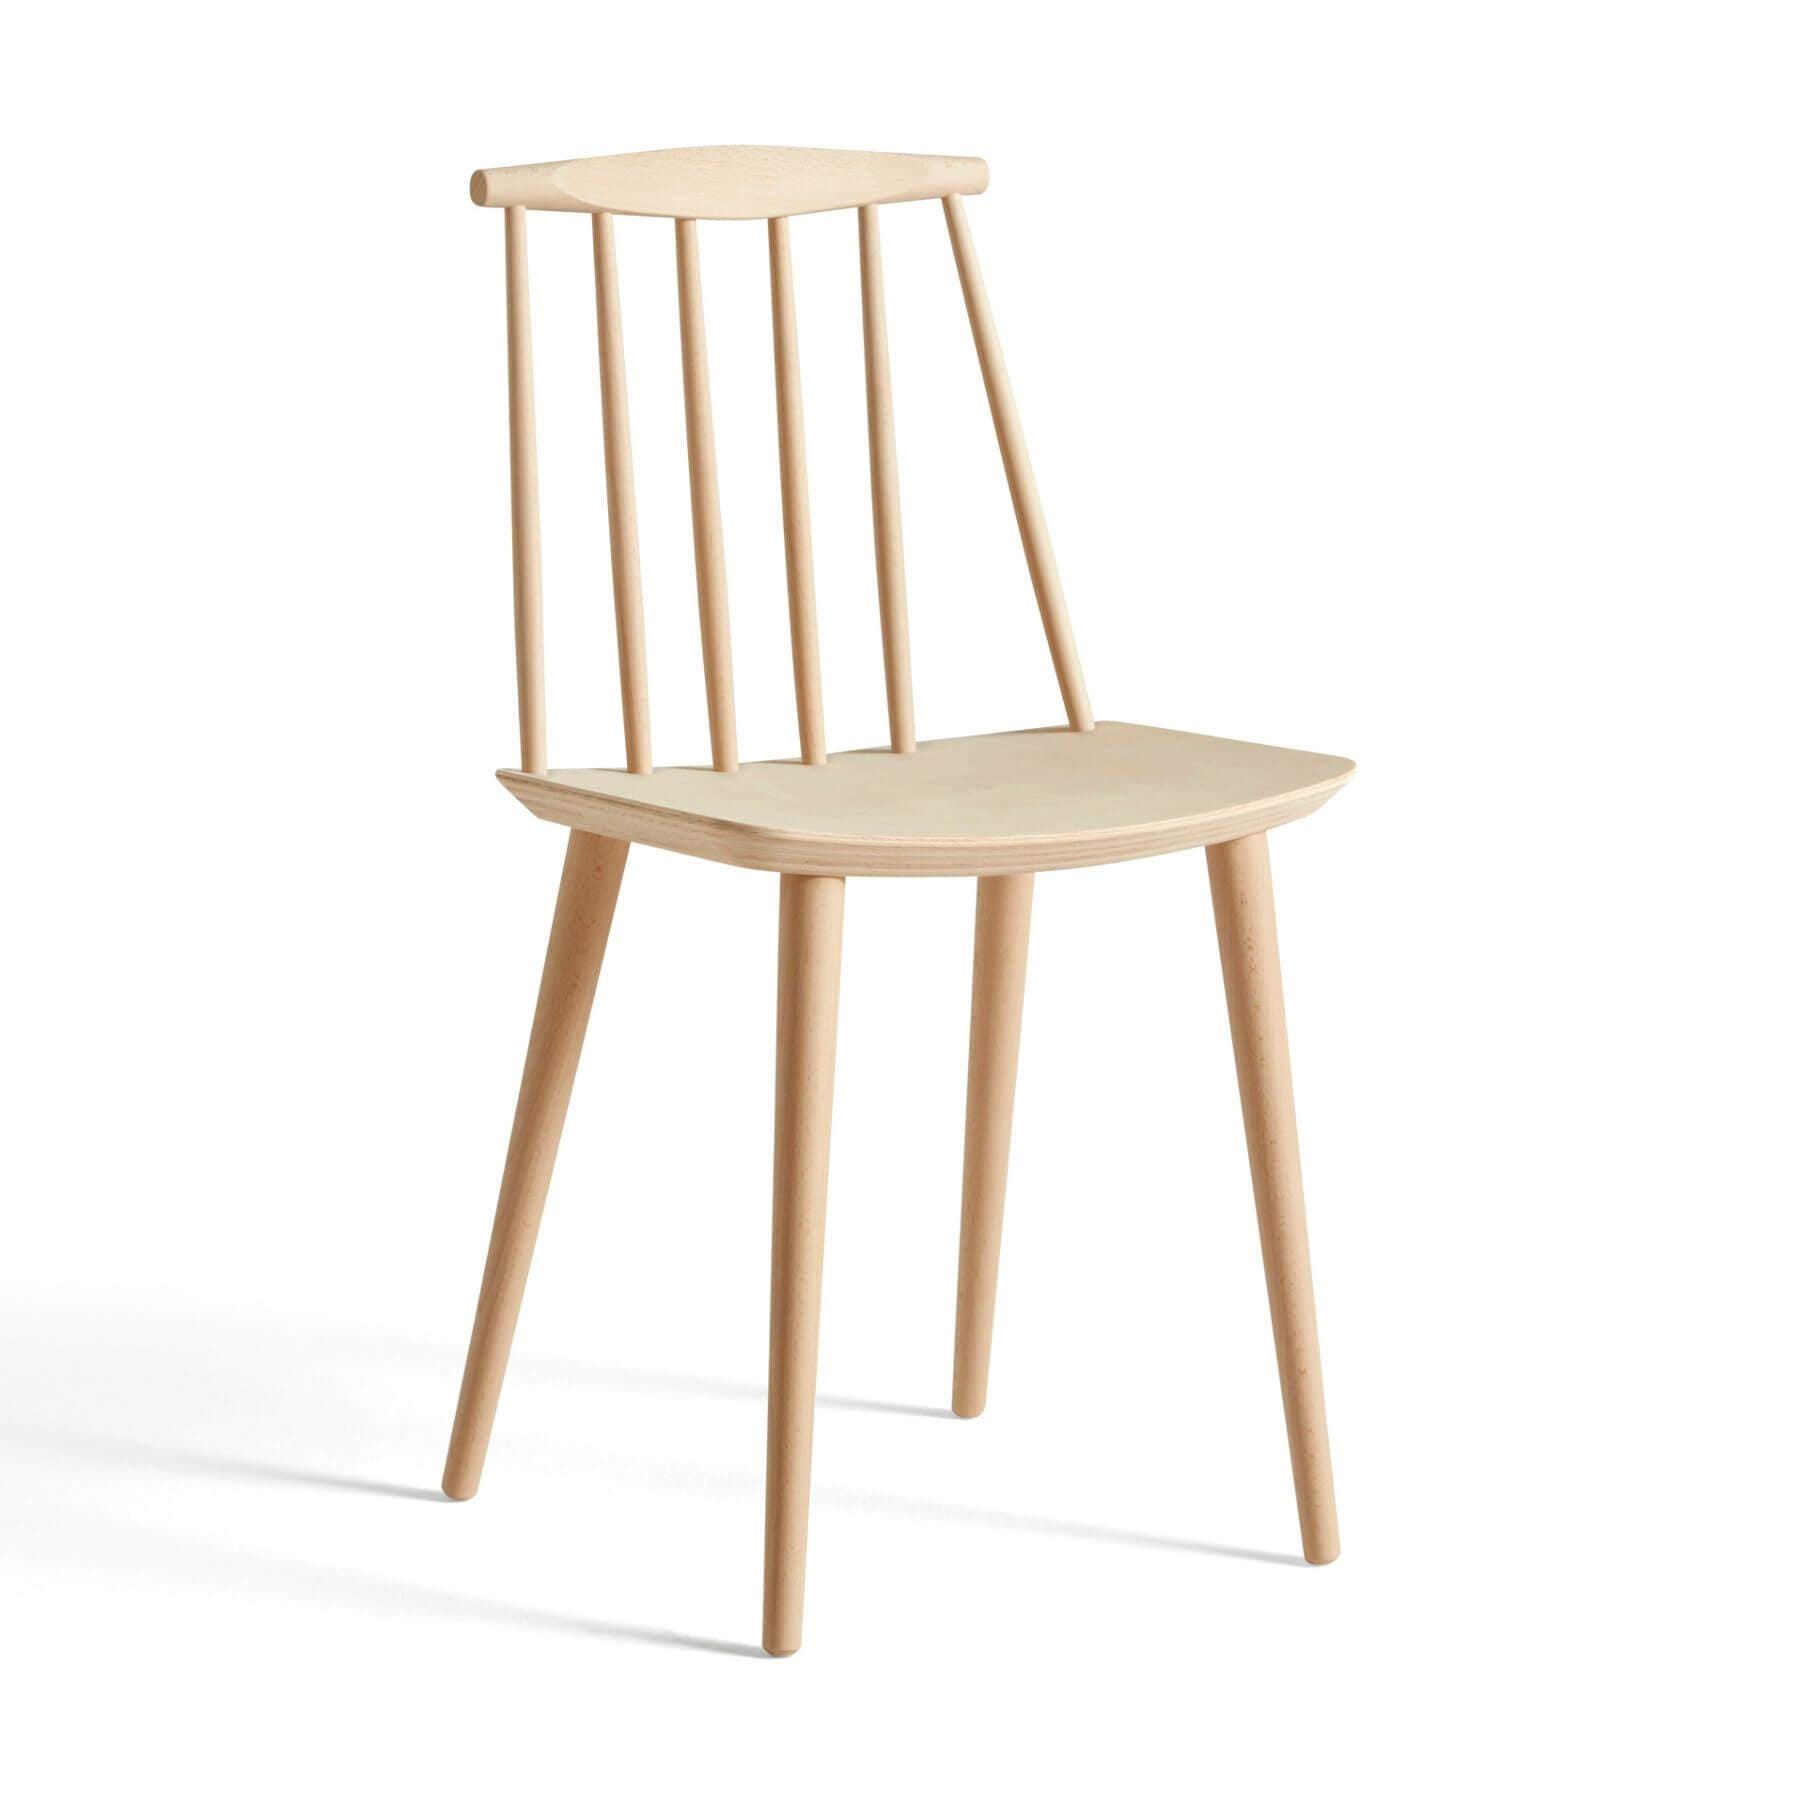 Hay Jseries 77 Dining Chair Nature Solid Beech Felt Gliders Light Wood Designer Furniture From Holloways Of Ludlow